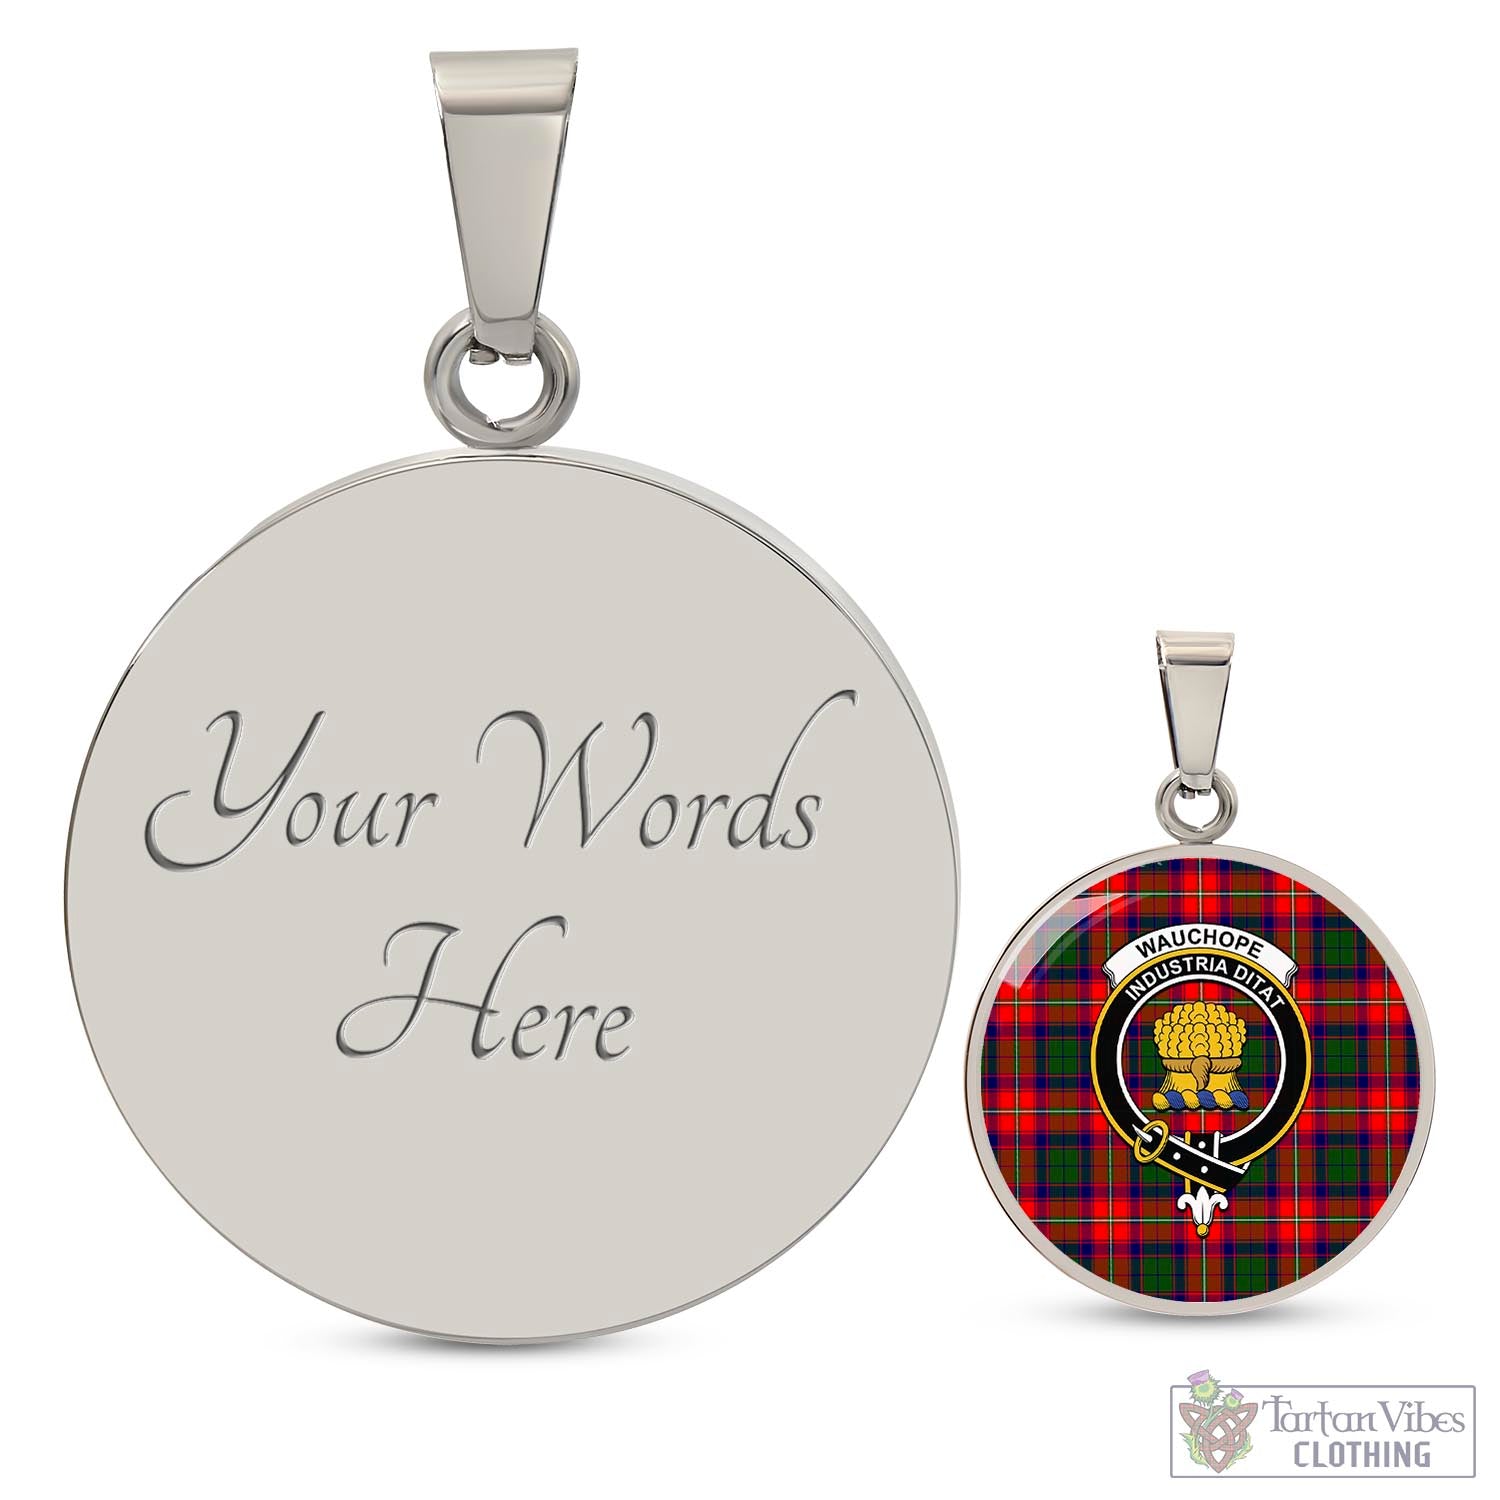 Tartan Vibes Clothing Wauchope Tartan Circle Necklace with Family Crest